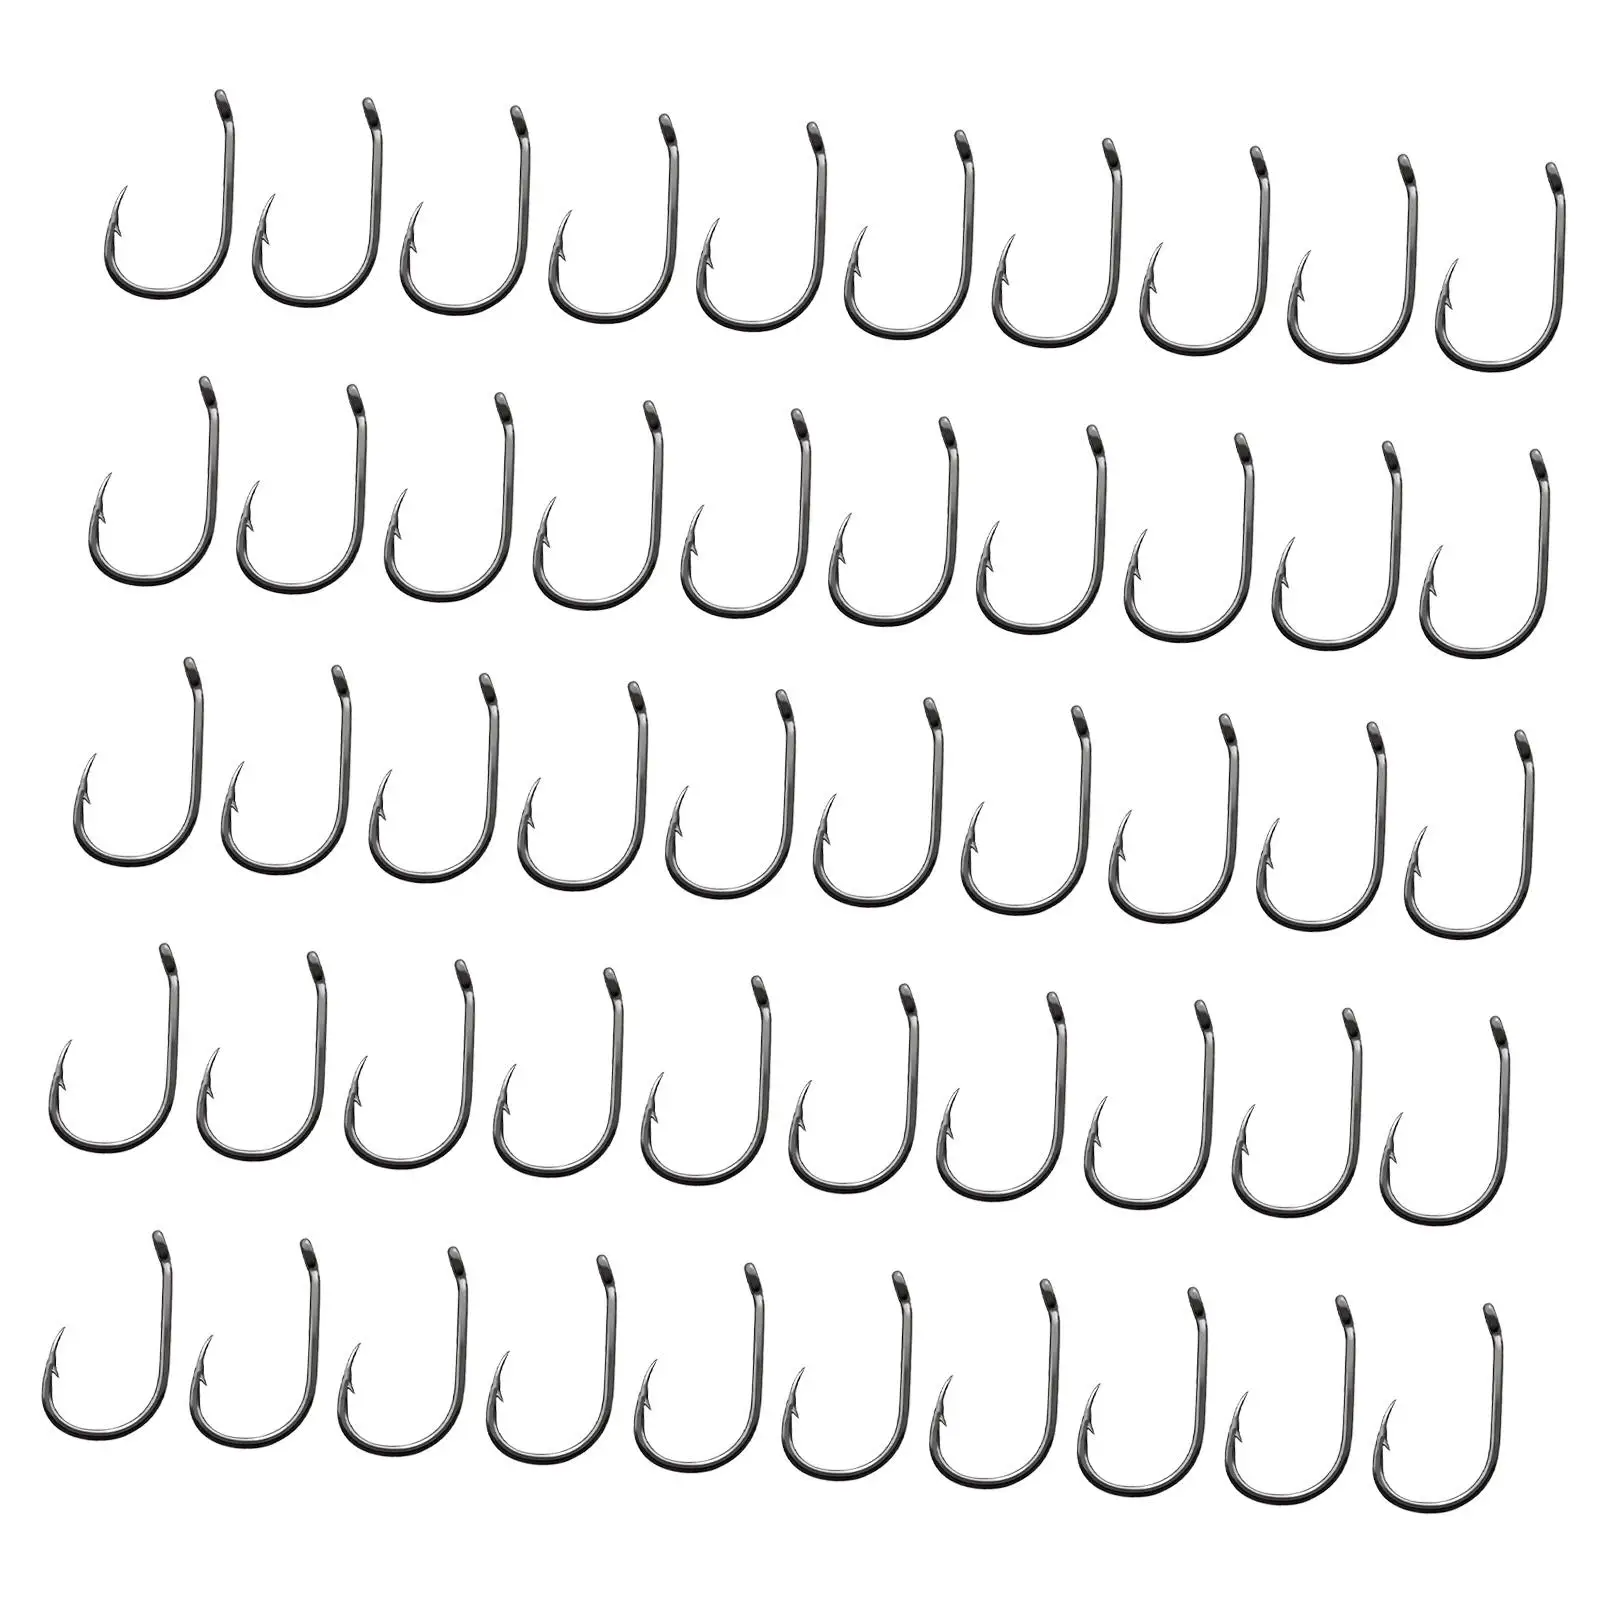 50Pcs Barb Curved Fly Fishing Hooks Fish Hooks Gear High Carbon Steel Lightweight for Tying Flies for Outdoor Sports Freshwater